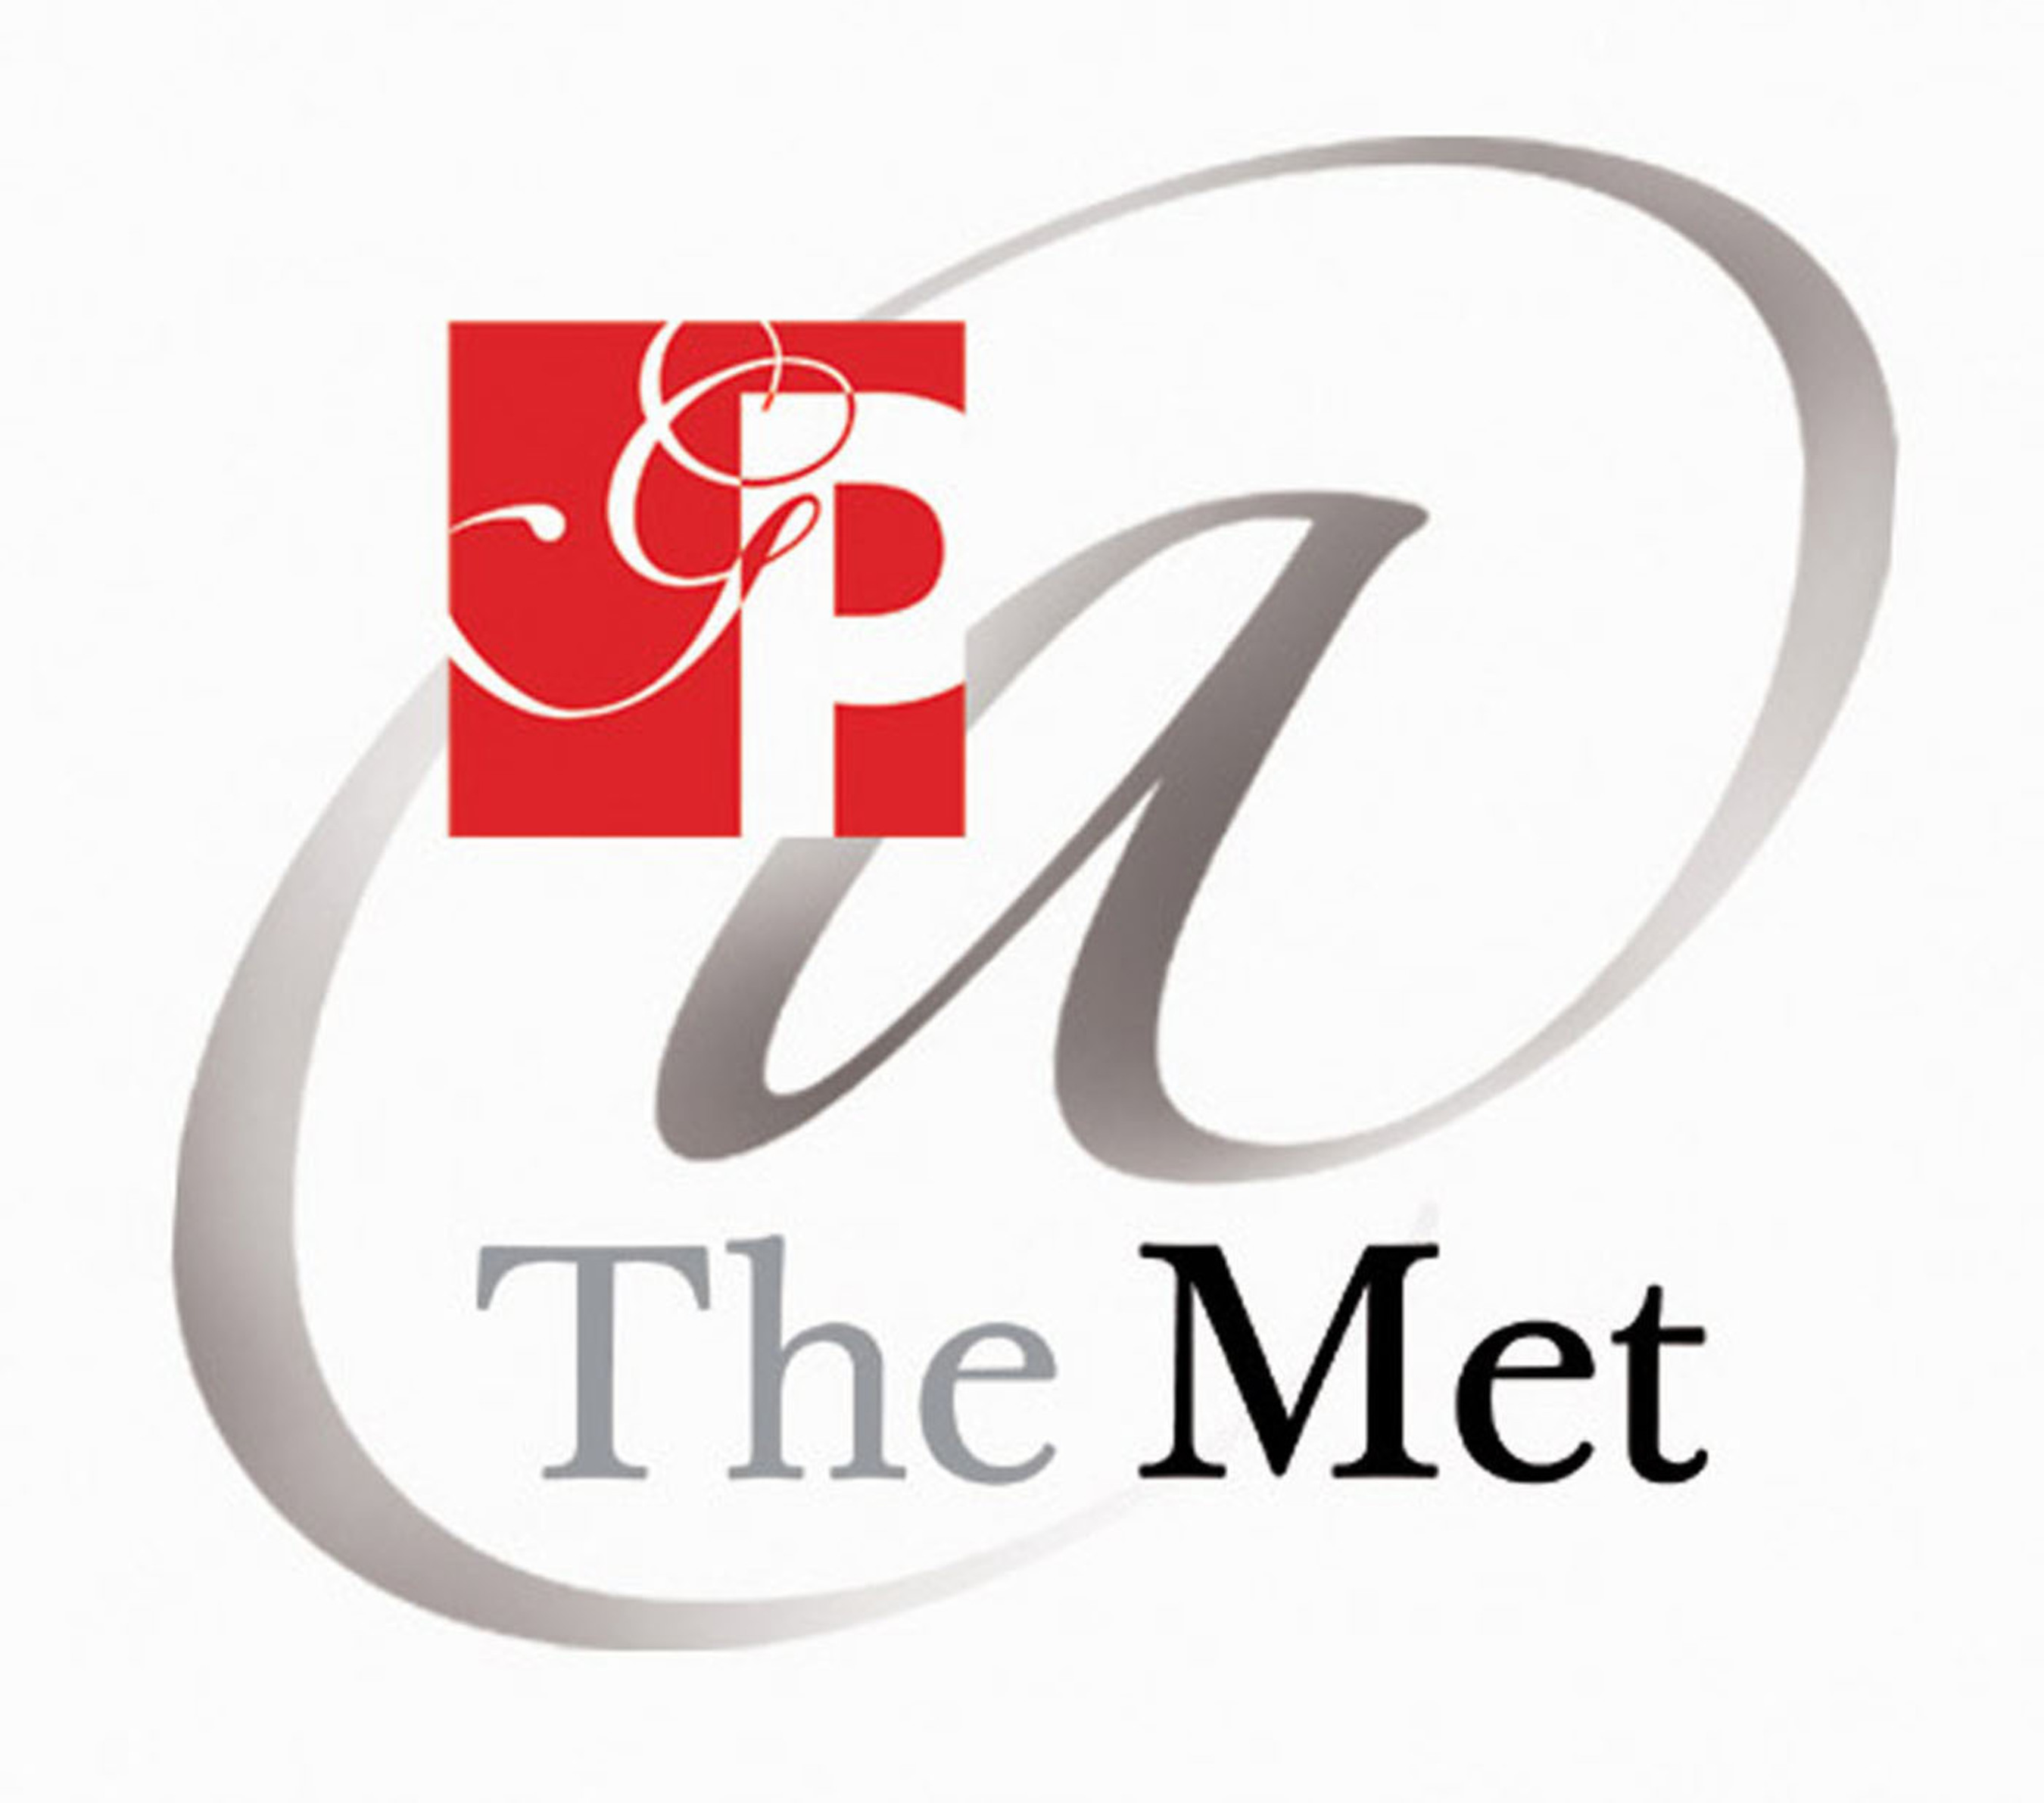 Great Performances at the Met, courtesy: WNET New York Public Media.